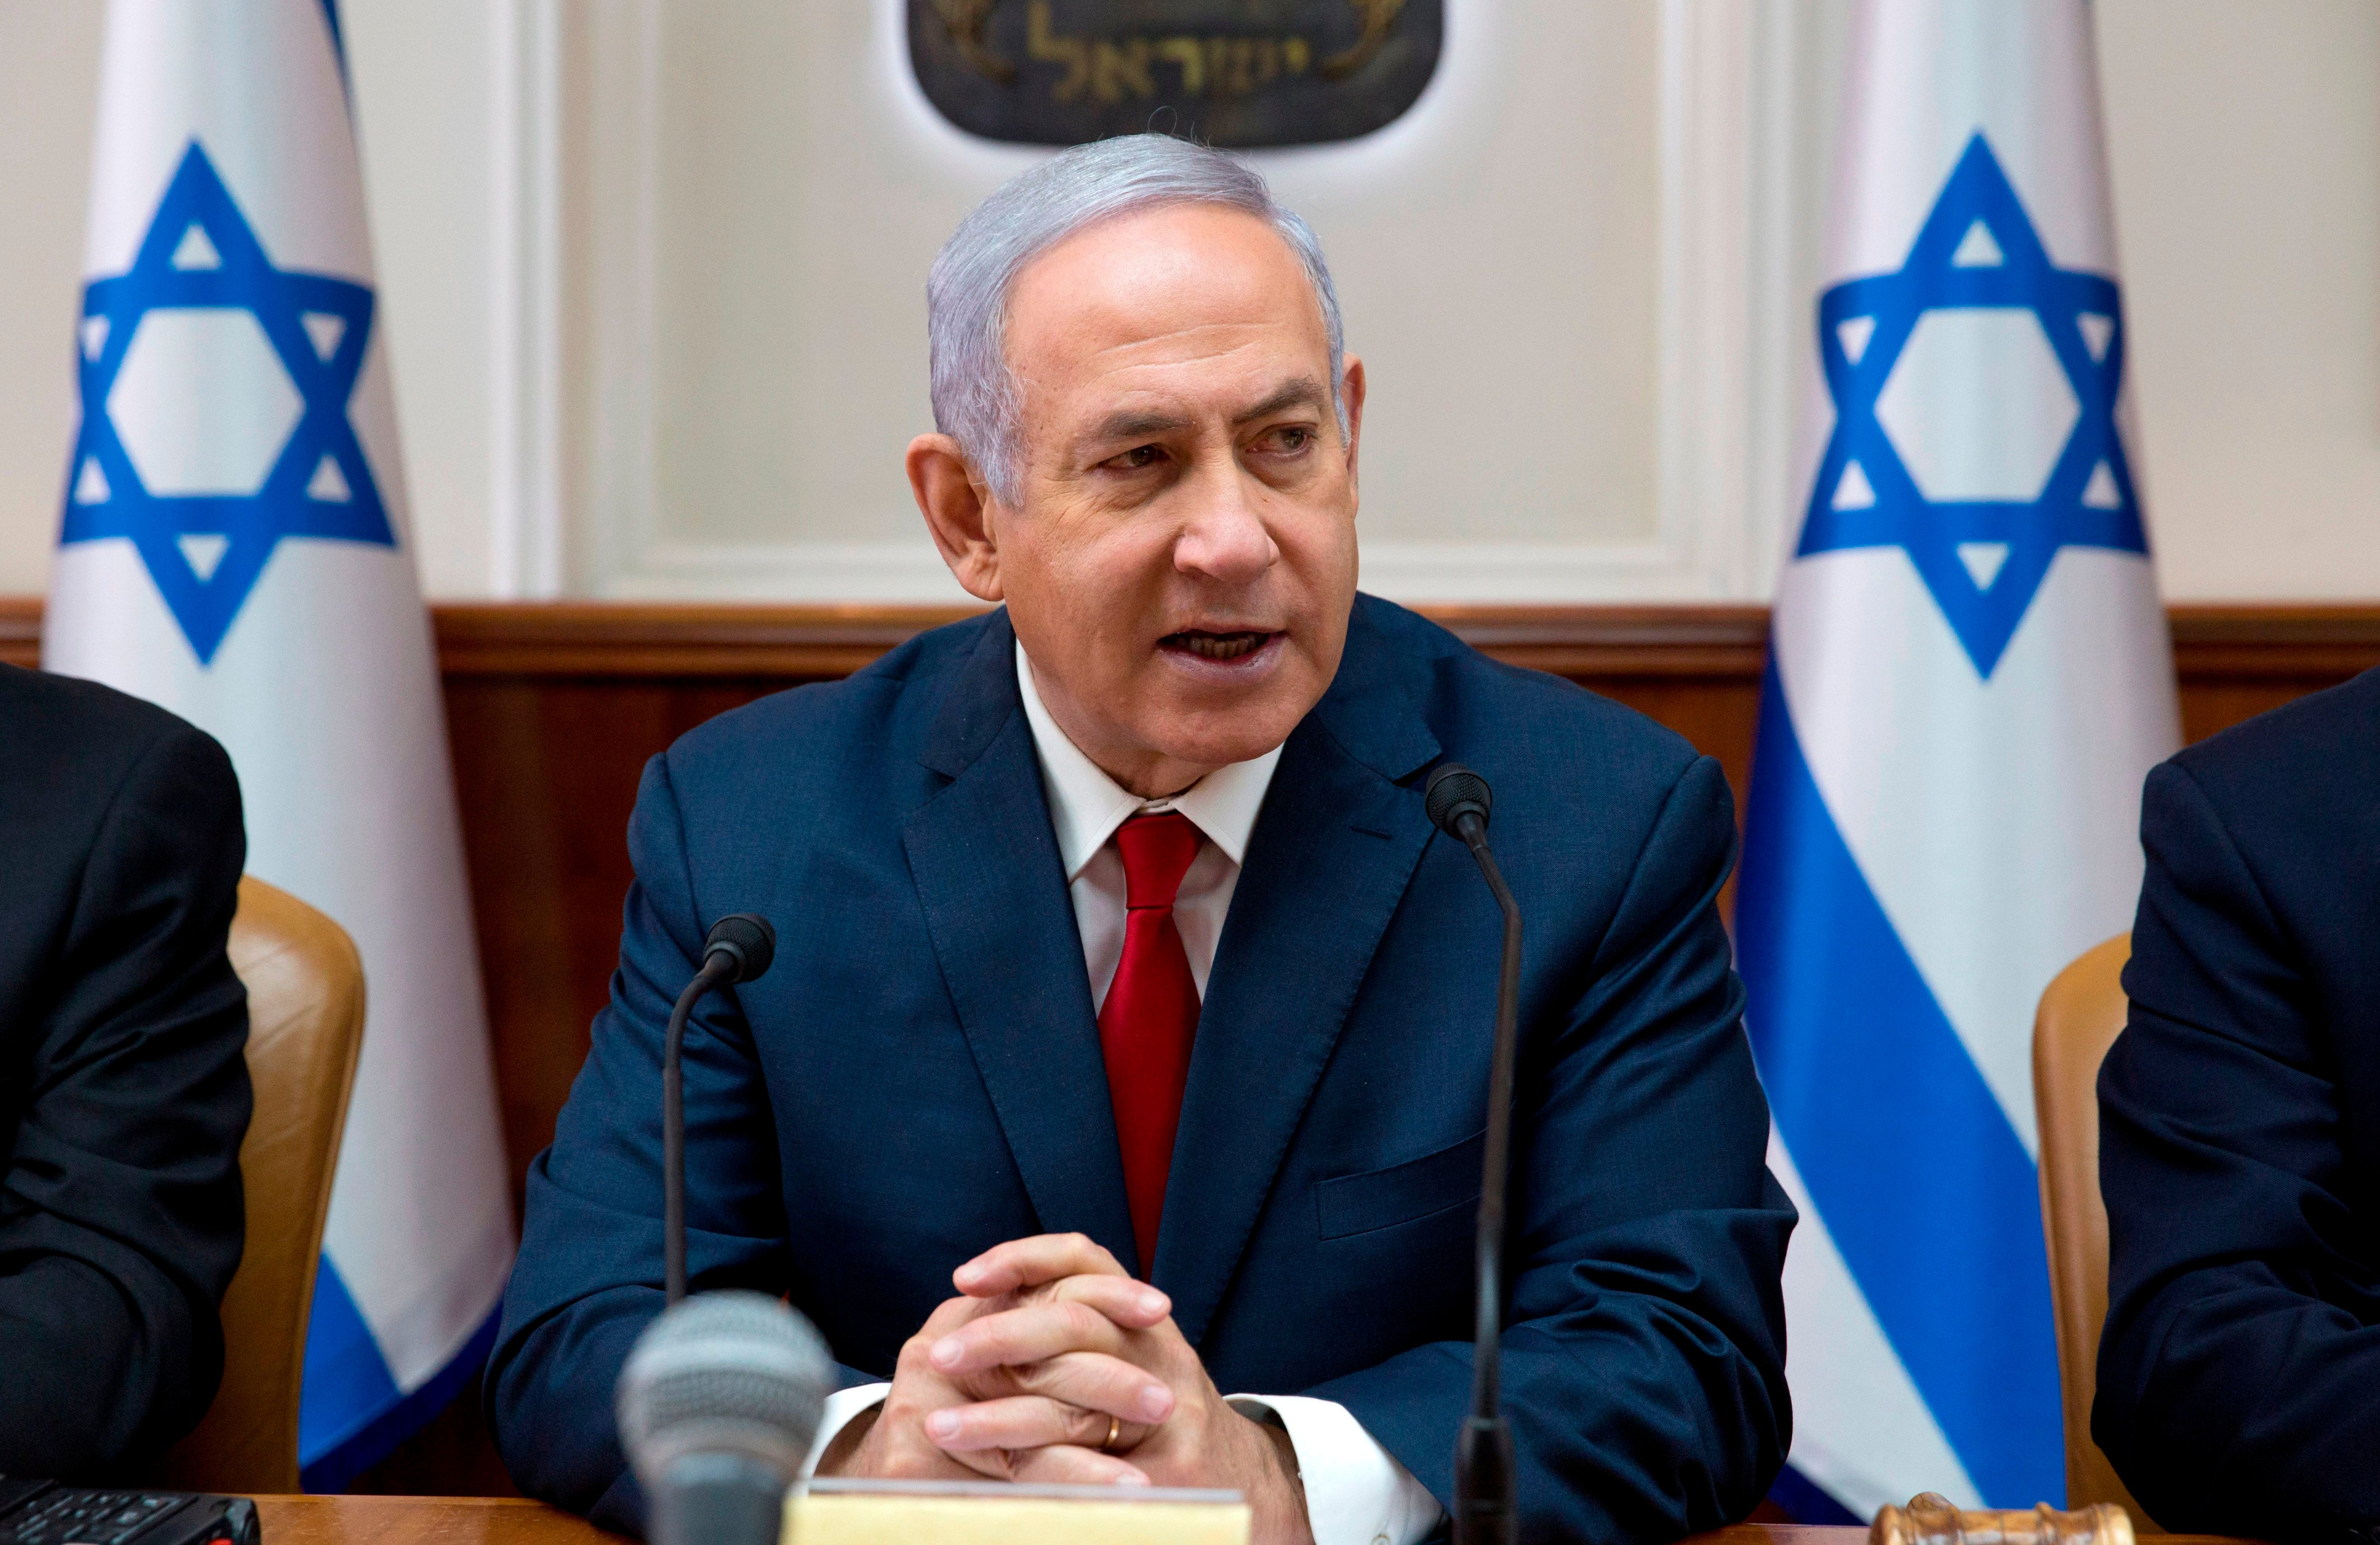 Israeli Prime Minister Benjamin Netanyahu attends the weekly cabinet meeting at the Prime Minister's office in Jerusalem on Feb. 17, 2019. (Sebastian Scheiner—AFP/Getty Images)